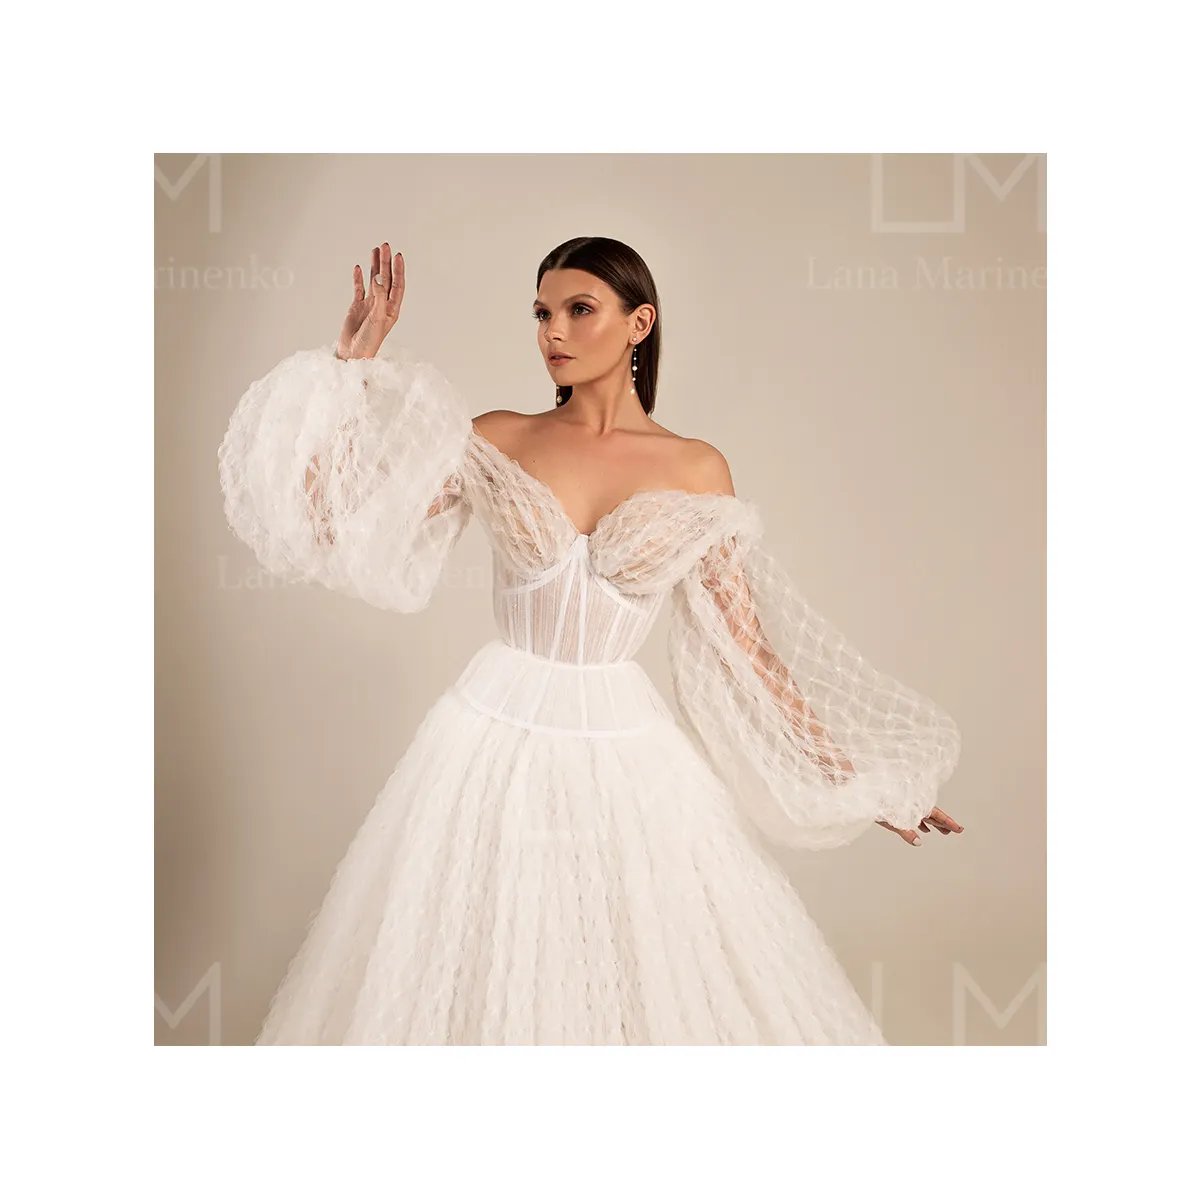 Custom design semi-open back and lace-up A silhouette "Bridget" woman's wedding dress with detachable puff sleeves for bride